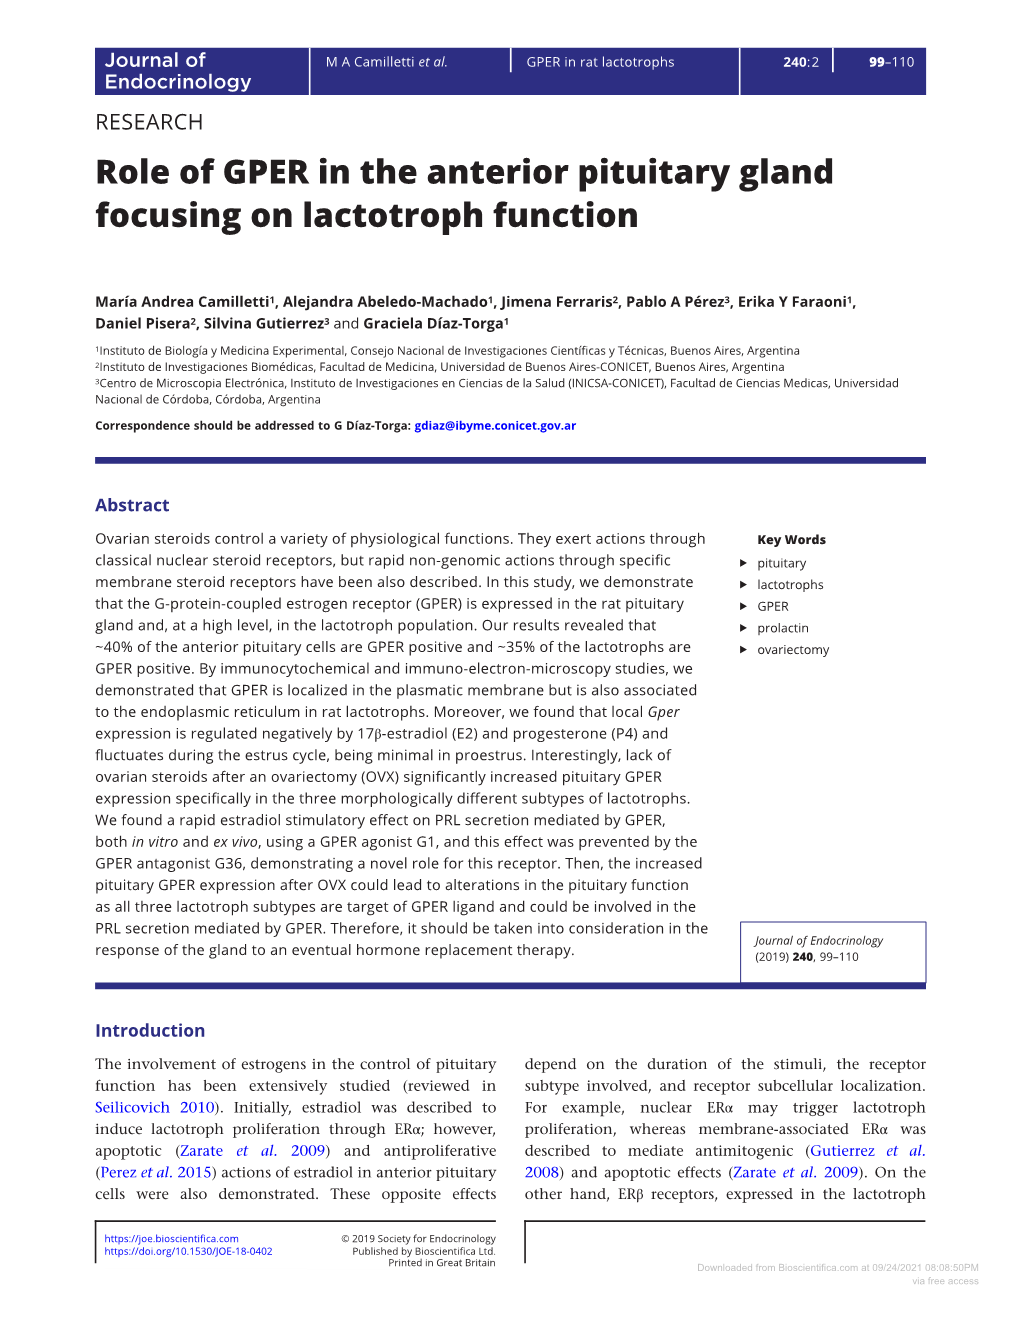 Role of GPER in the Anterior Pituitary Gland Focusing on Lactotroph Function